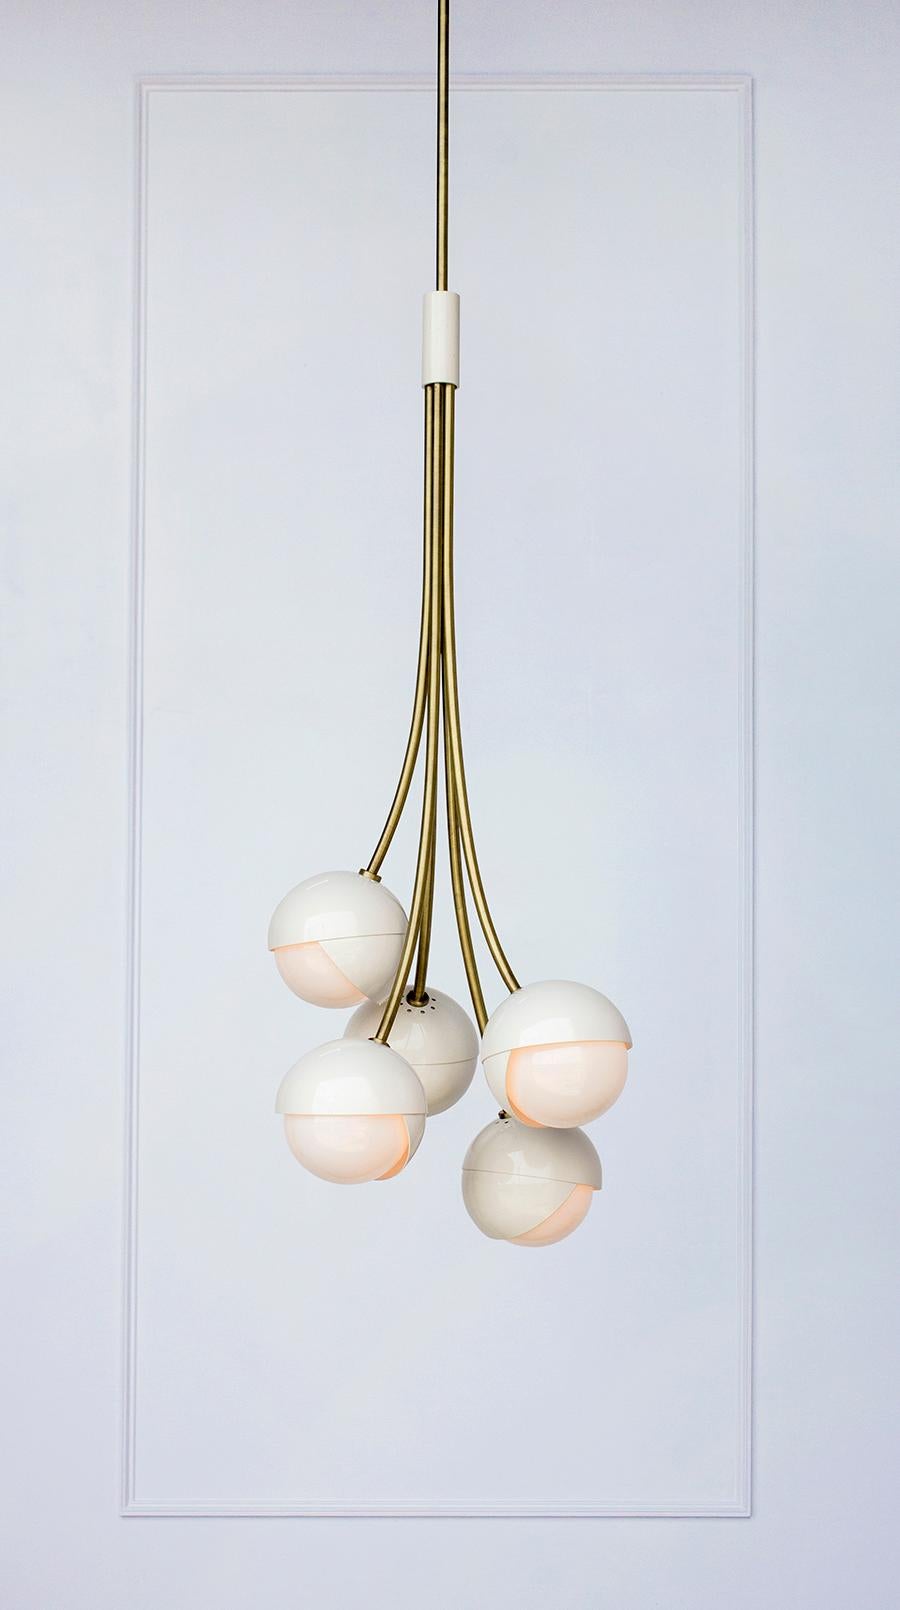 The Benedict™ Bloom chandelier suspends five pairs of nested brass hemispheres and white opal glass in an organic cluster held by hand rolled brass stems. Available in all Trella finishes the Benedict™ Bloom chandelier is able to make a playful yet